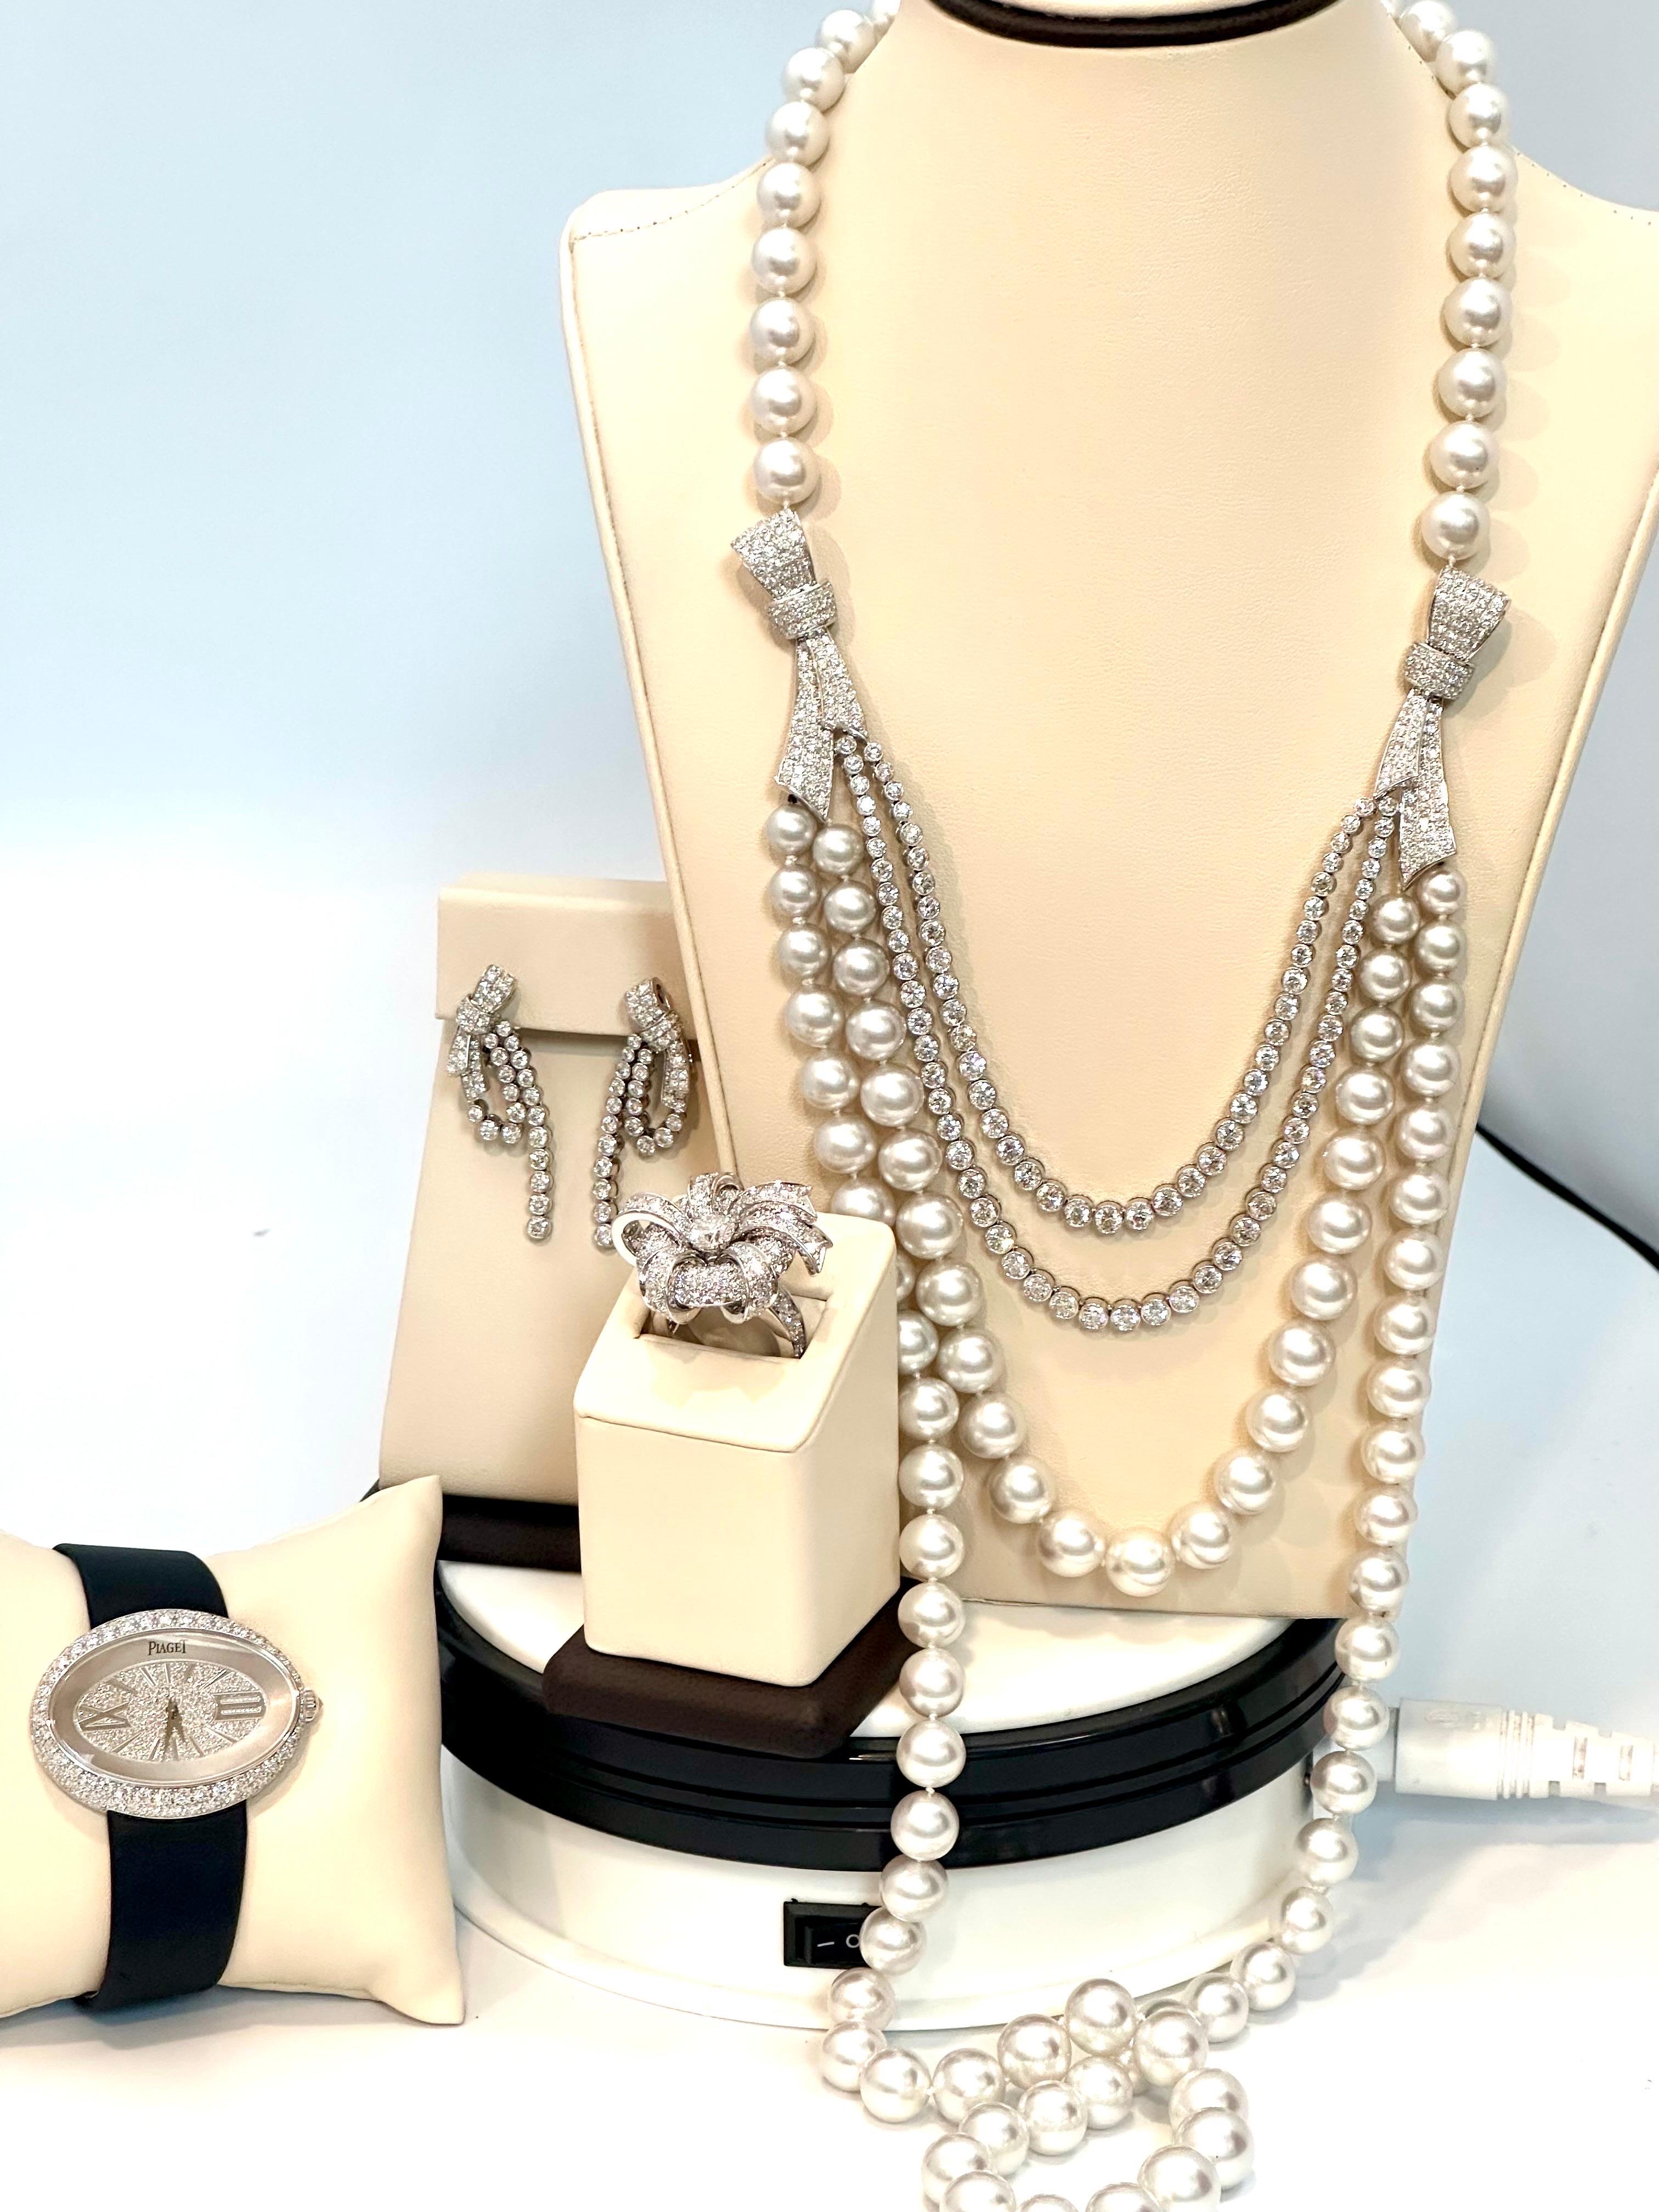 Piaget Paris Diamond & South Sea Pearl Suite Necklace, Earring Watch & Ring 18K For Sale 6